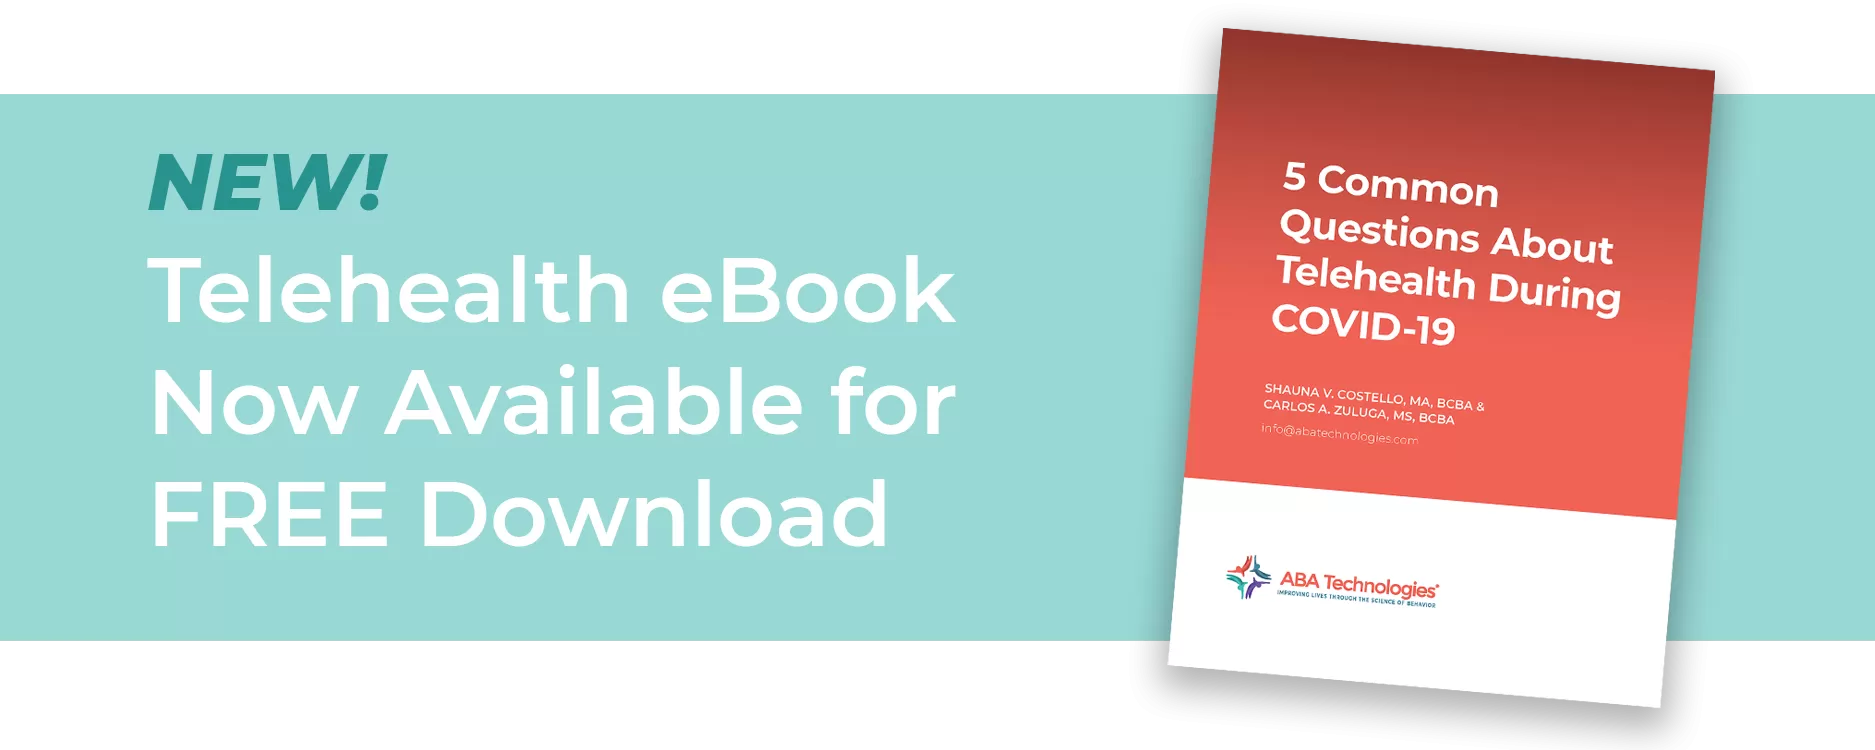 Telehealth eBook now available for FREE download